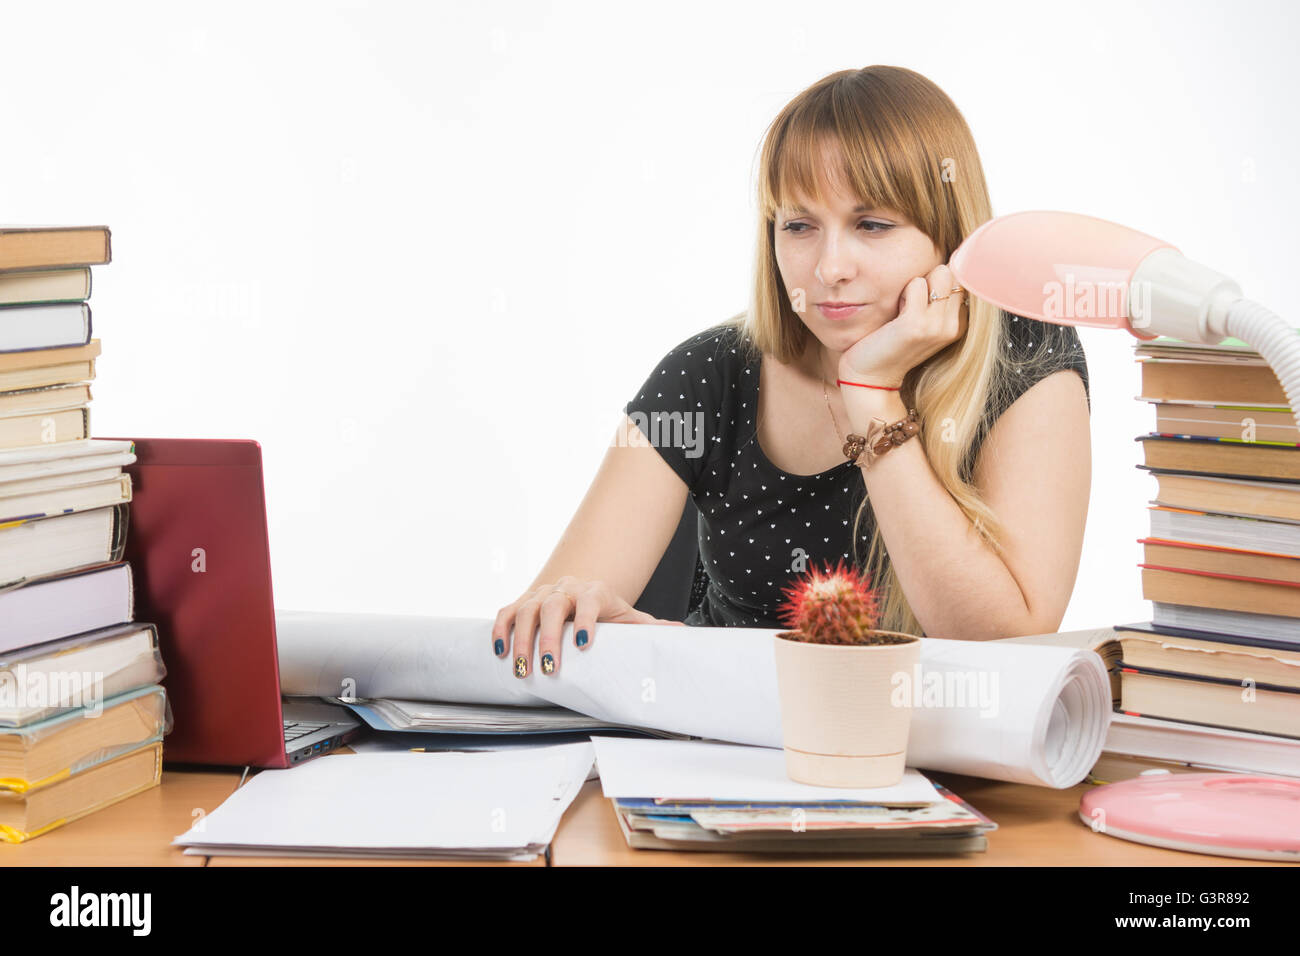 Student with contempt and weariness looking at laptop monitor Stock Photo